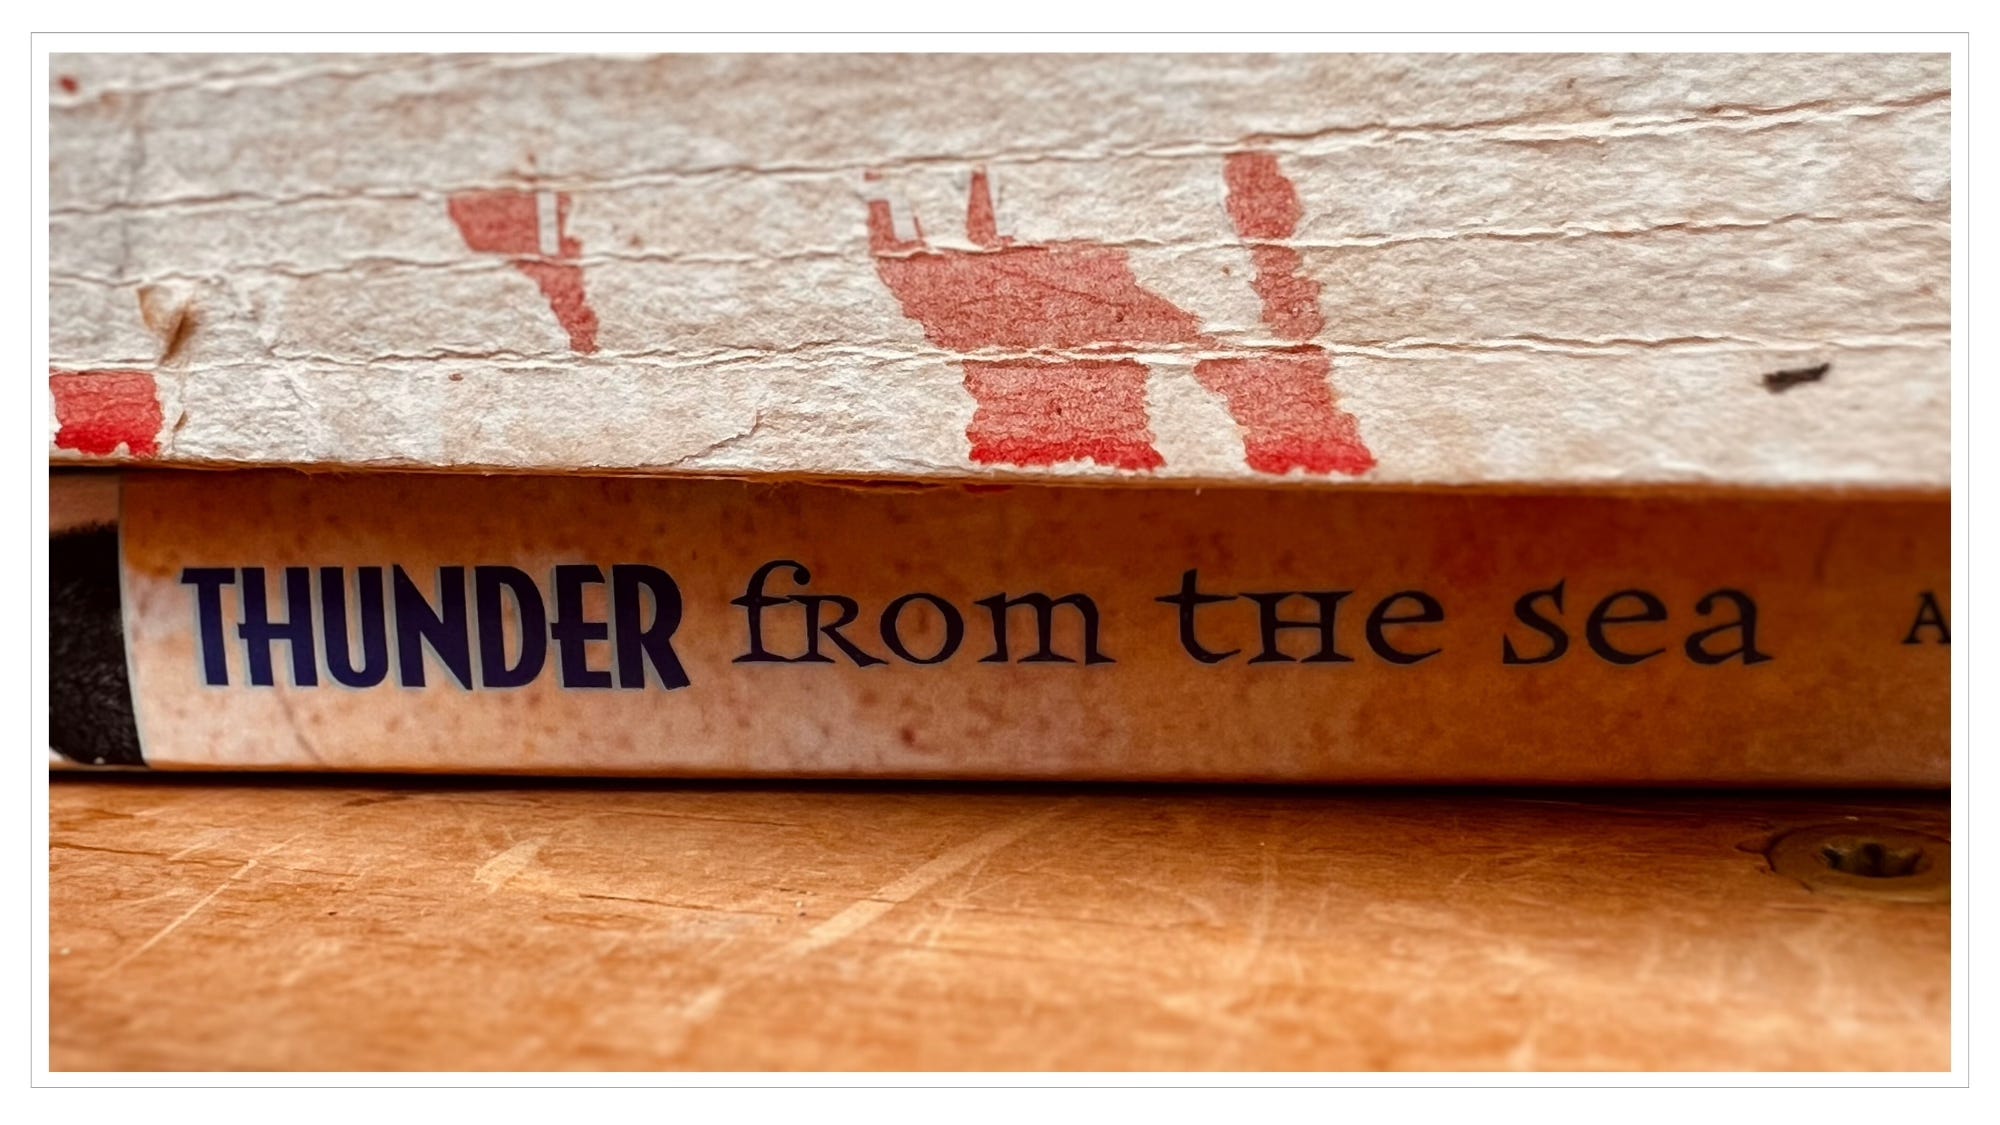 close-up of book, torn spine and book entitled thunder from the sea